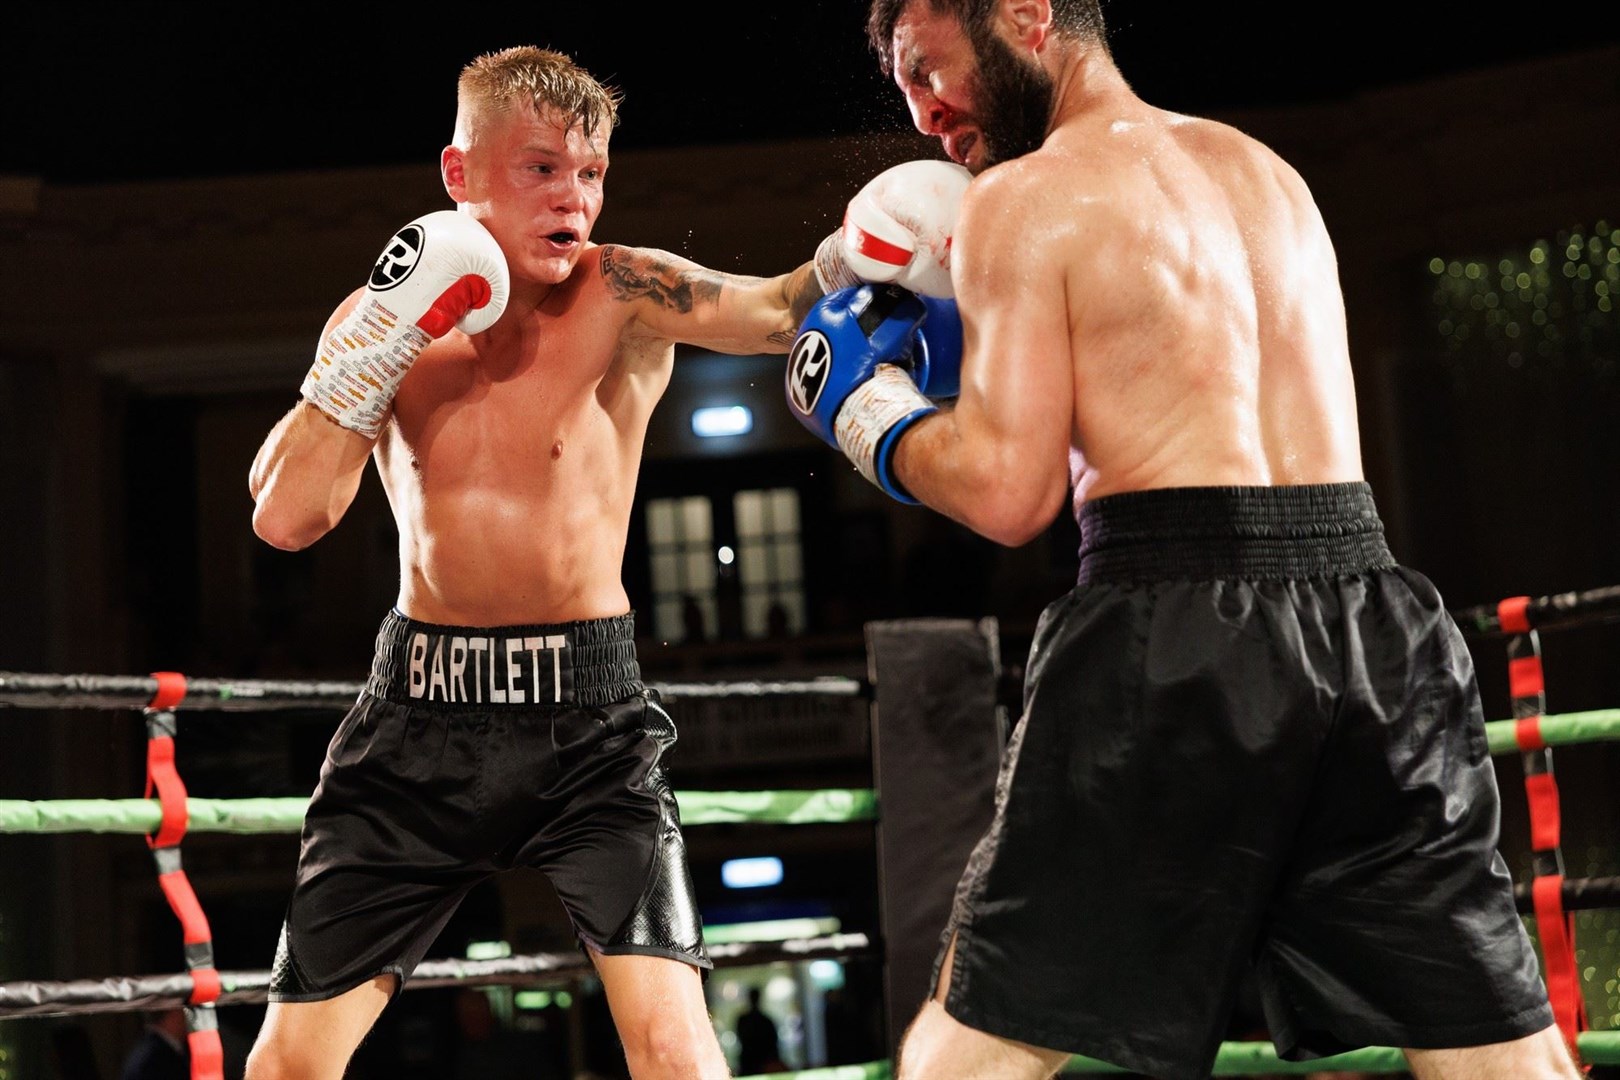 Highland Boxing Academy's Ben Bartlett defeated Russian boxer Vasif Mamedov to move on to 7-0 as a professional. Picture: Stephen Dobson